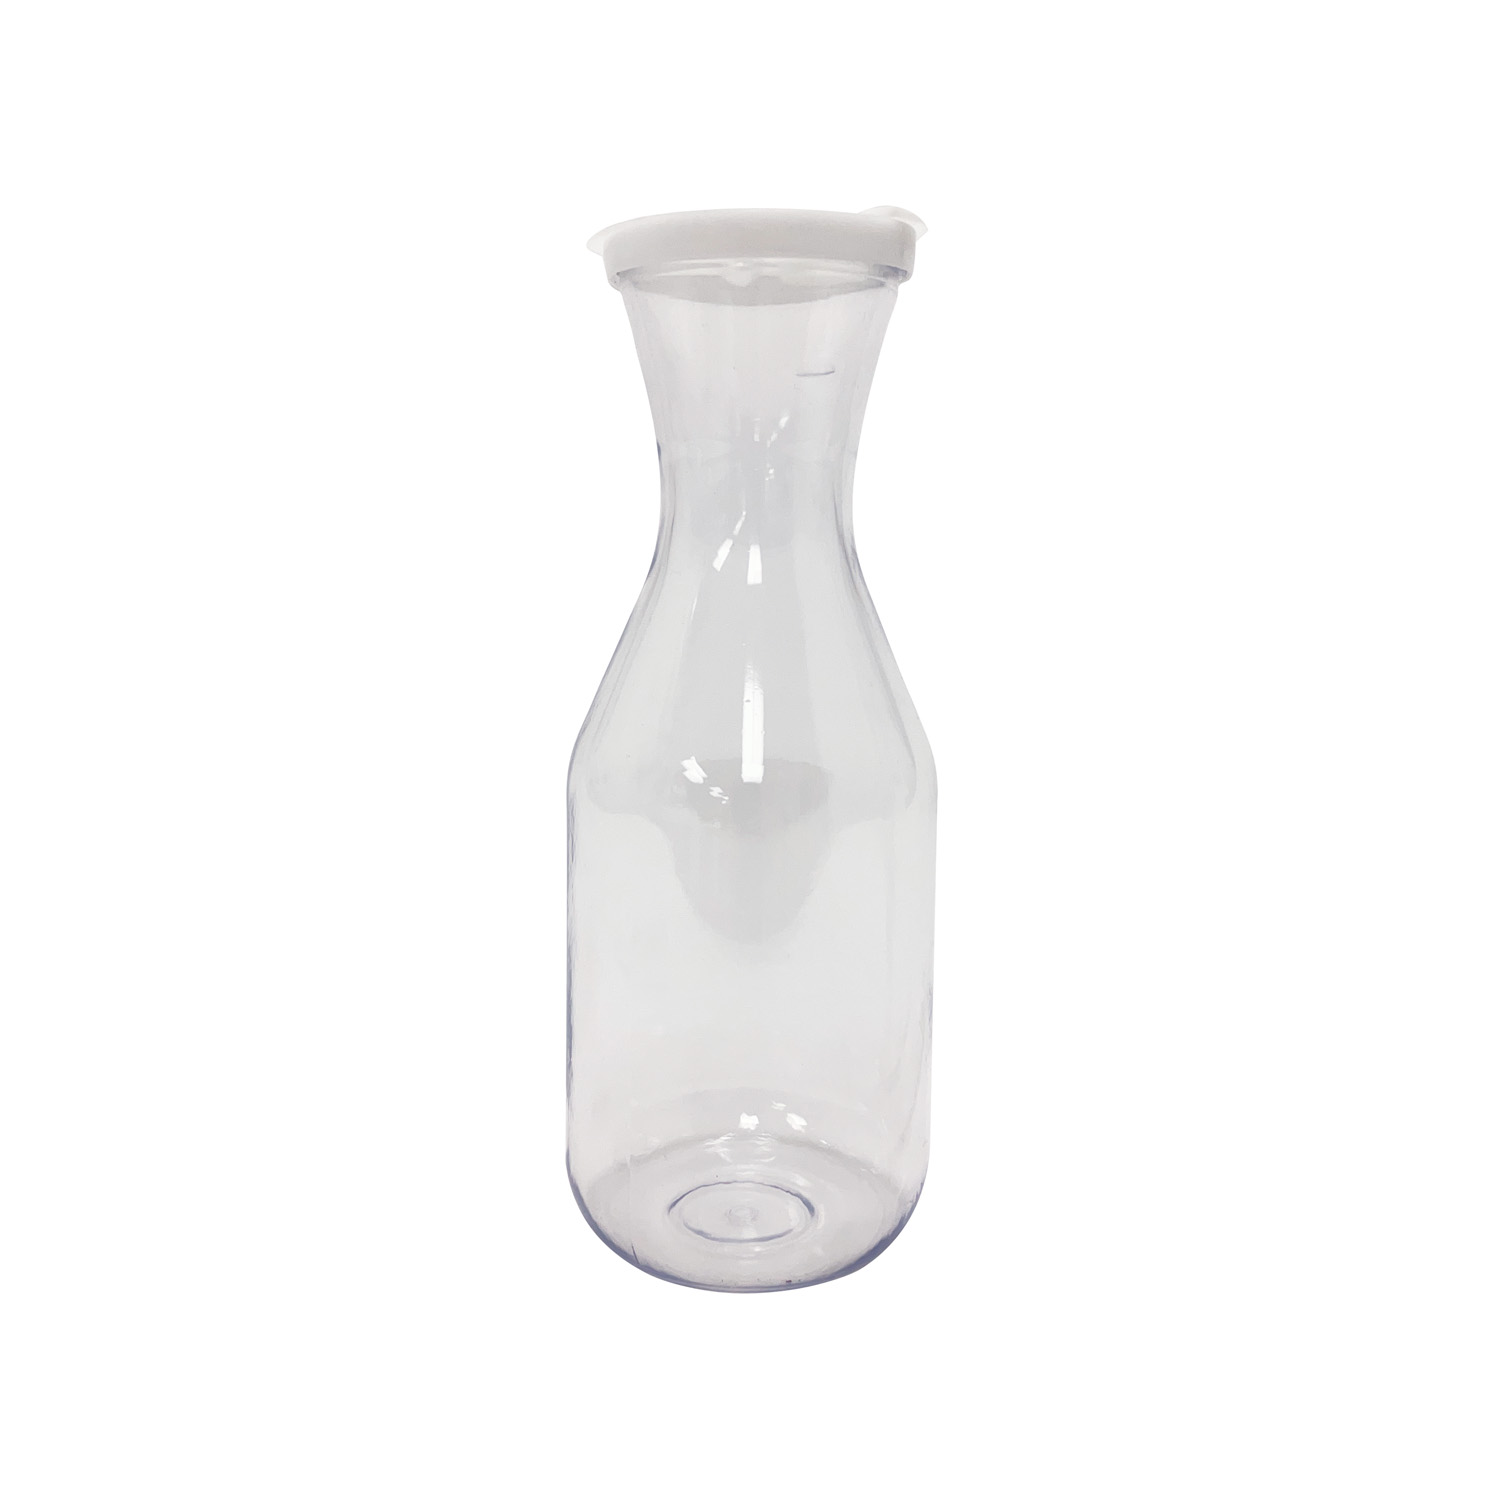 CAC China DCTL-10 Clear Plastic Beverage Decanter with Cover 1 Qt.